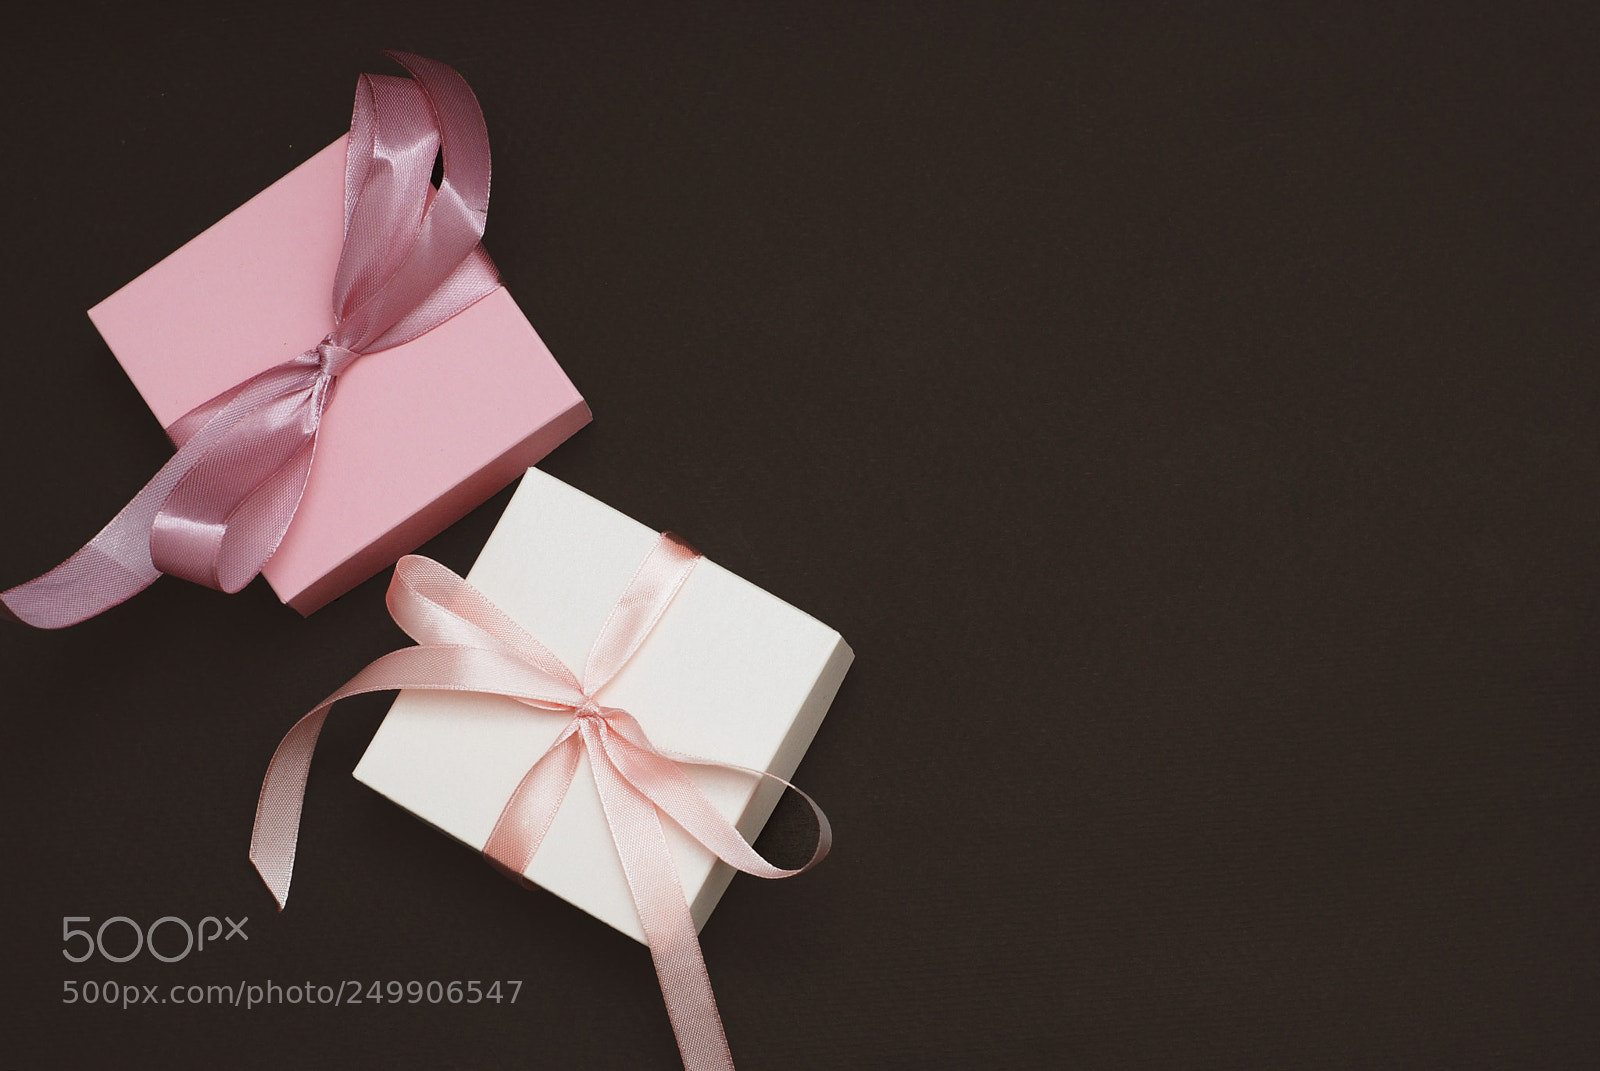 Nikon D80 sample photo. White and pink gift photography